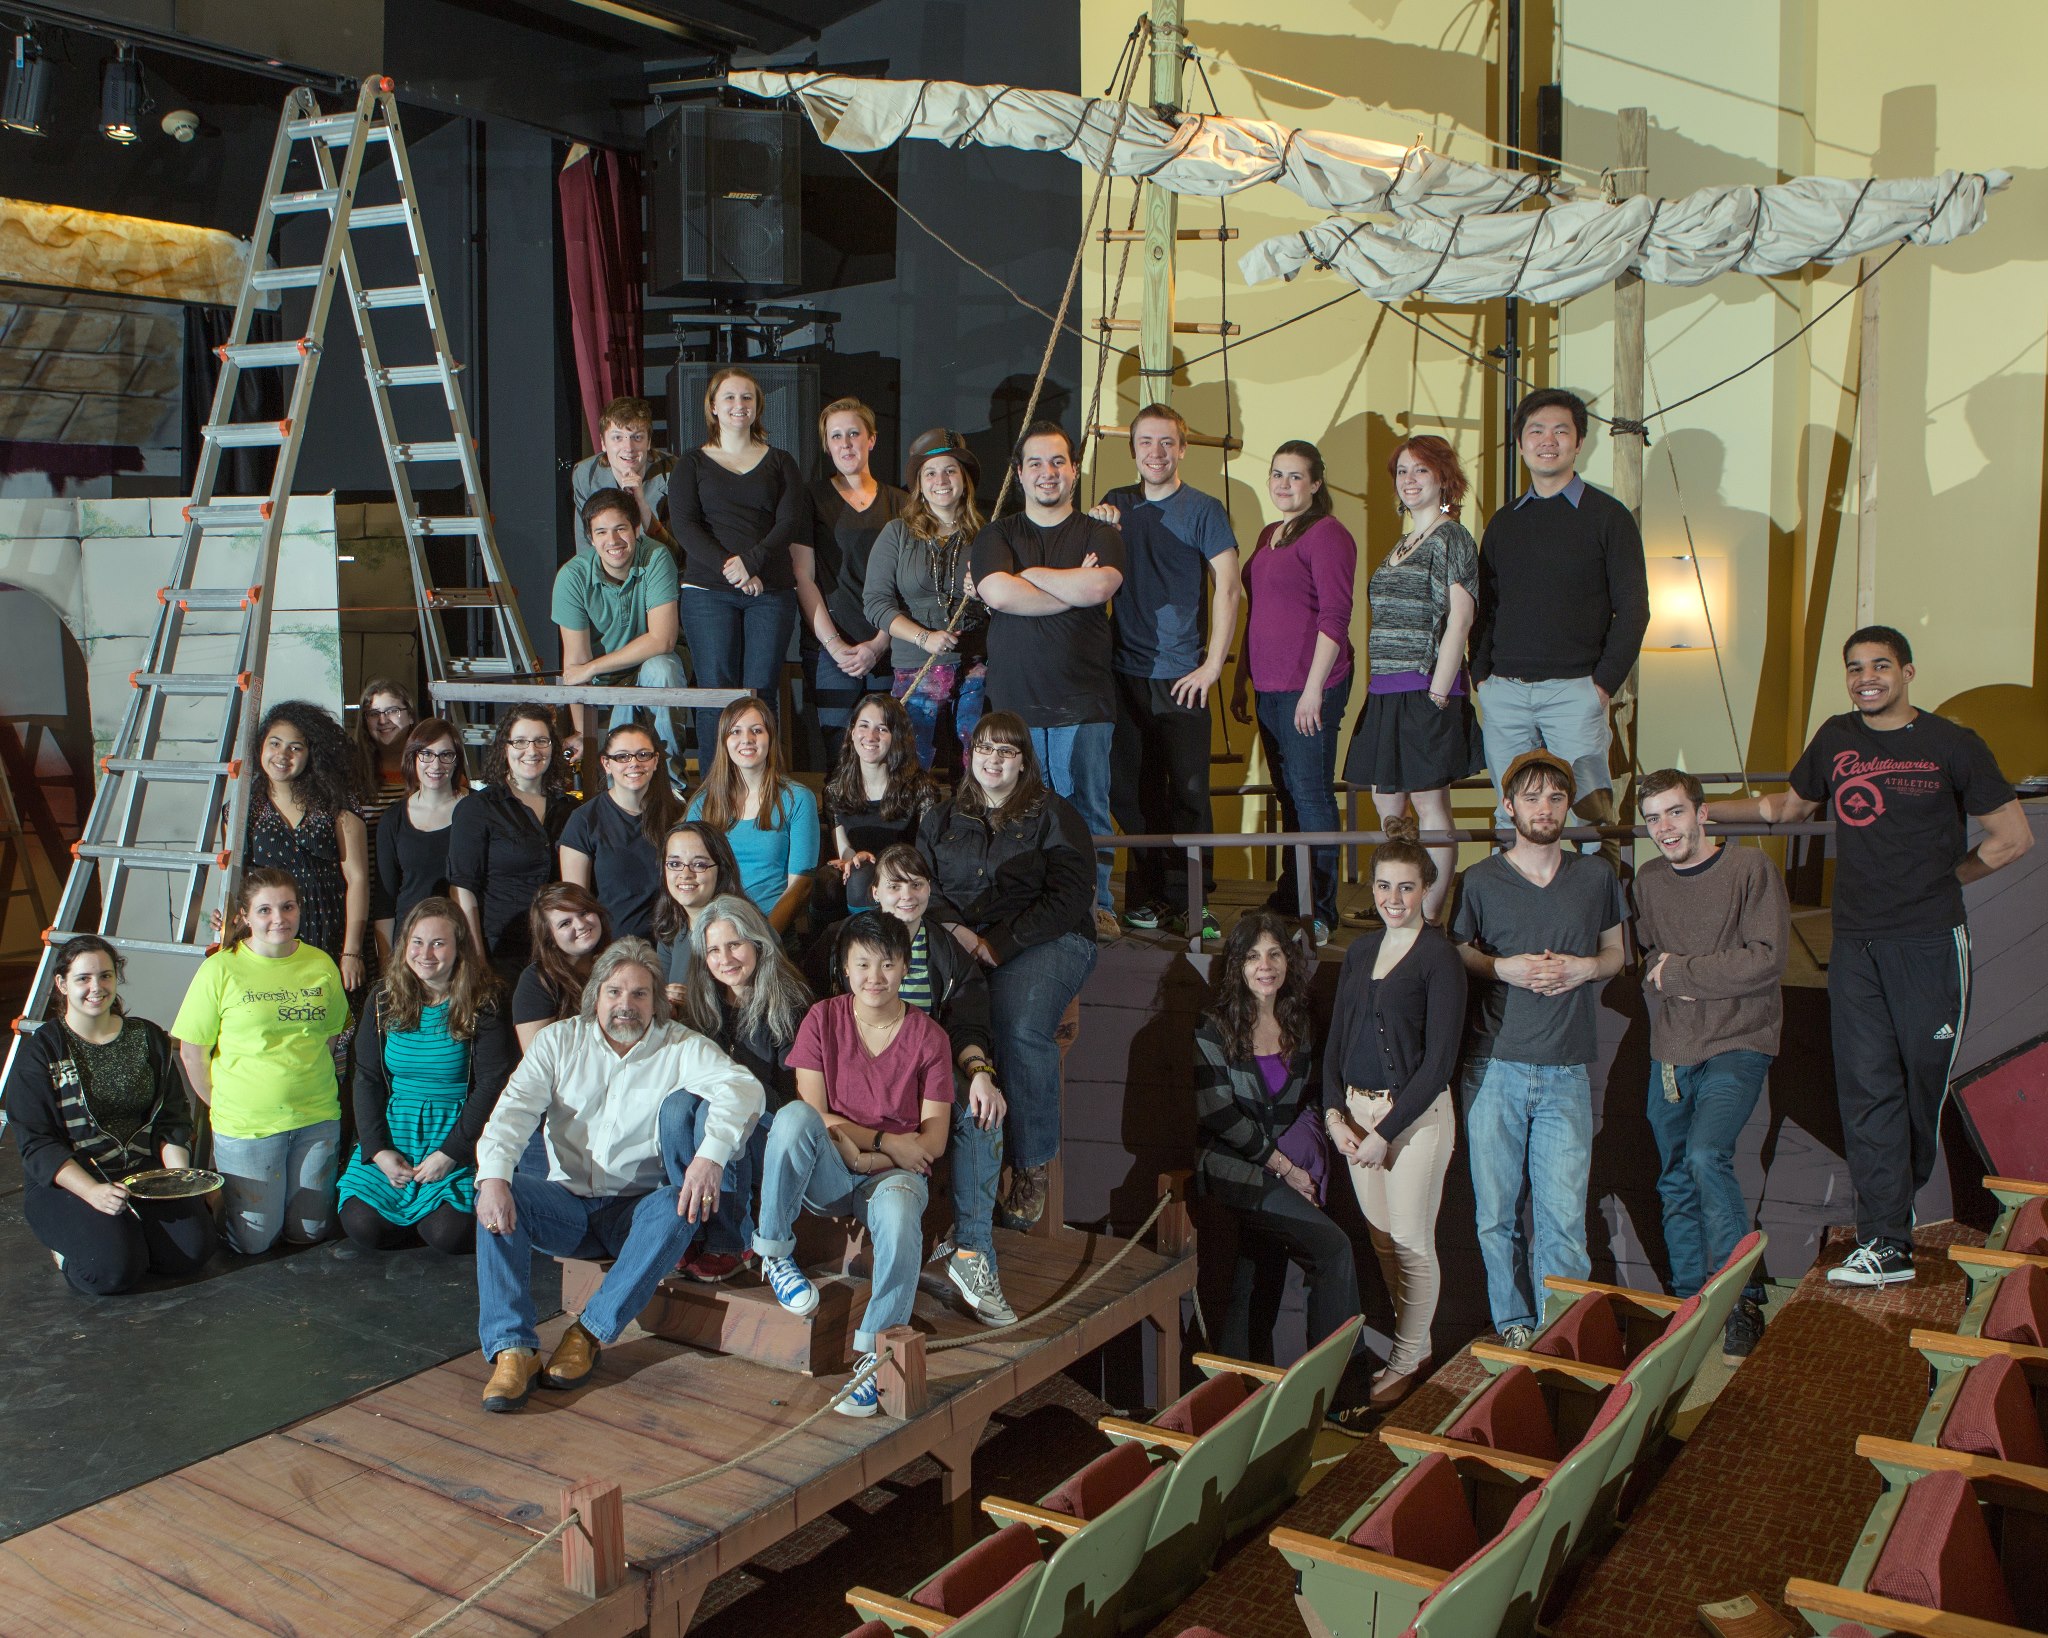 The cast of Antony and Cleopatra in Marran Theater